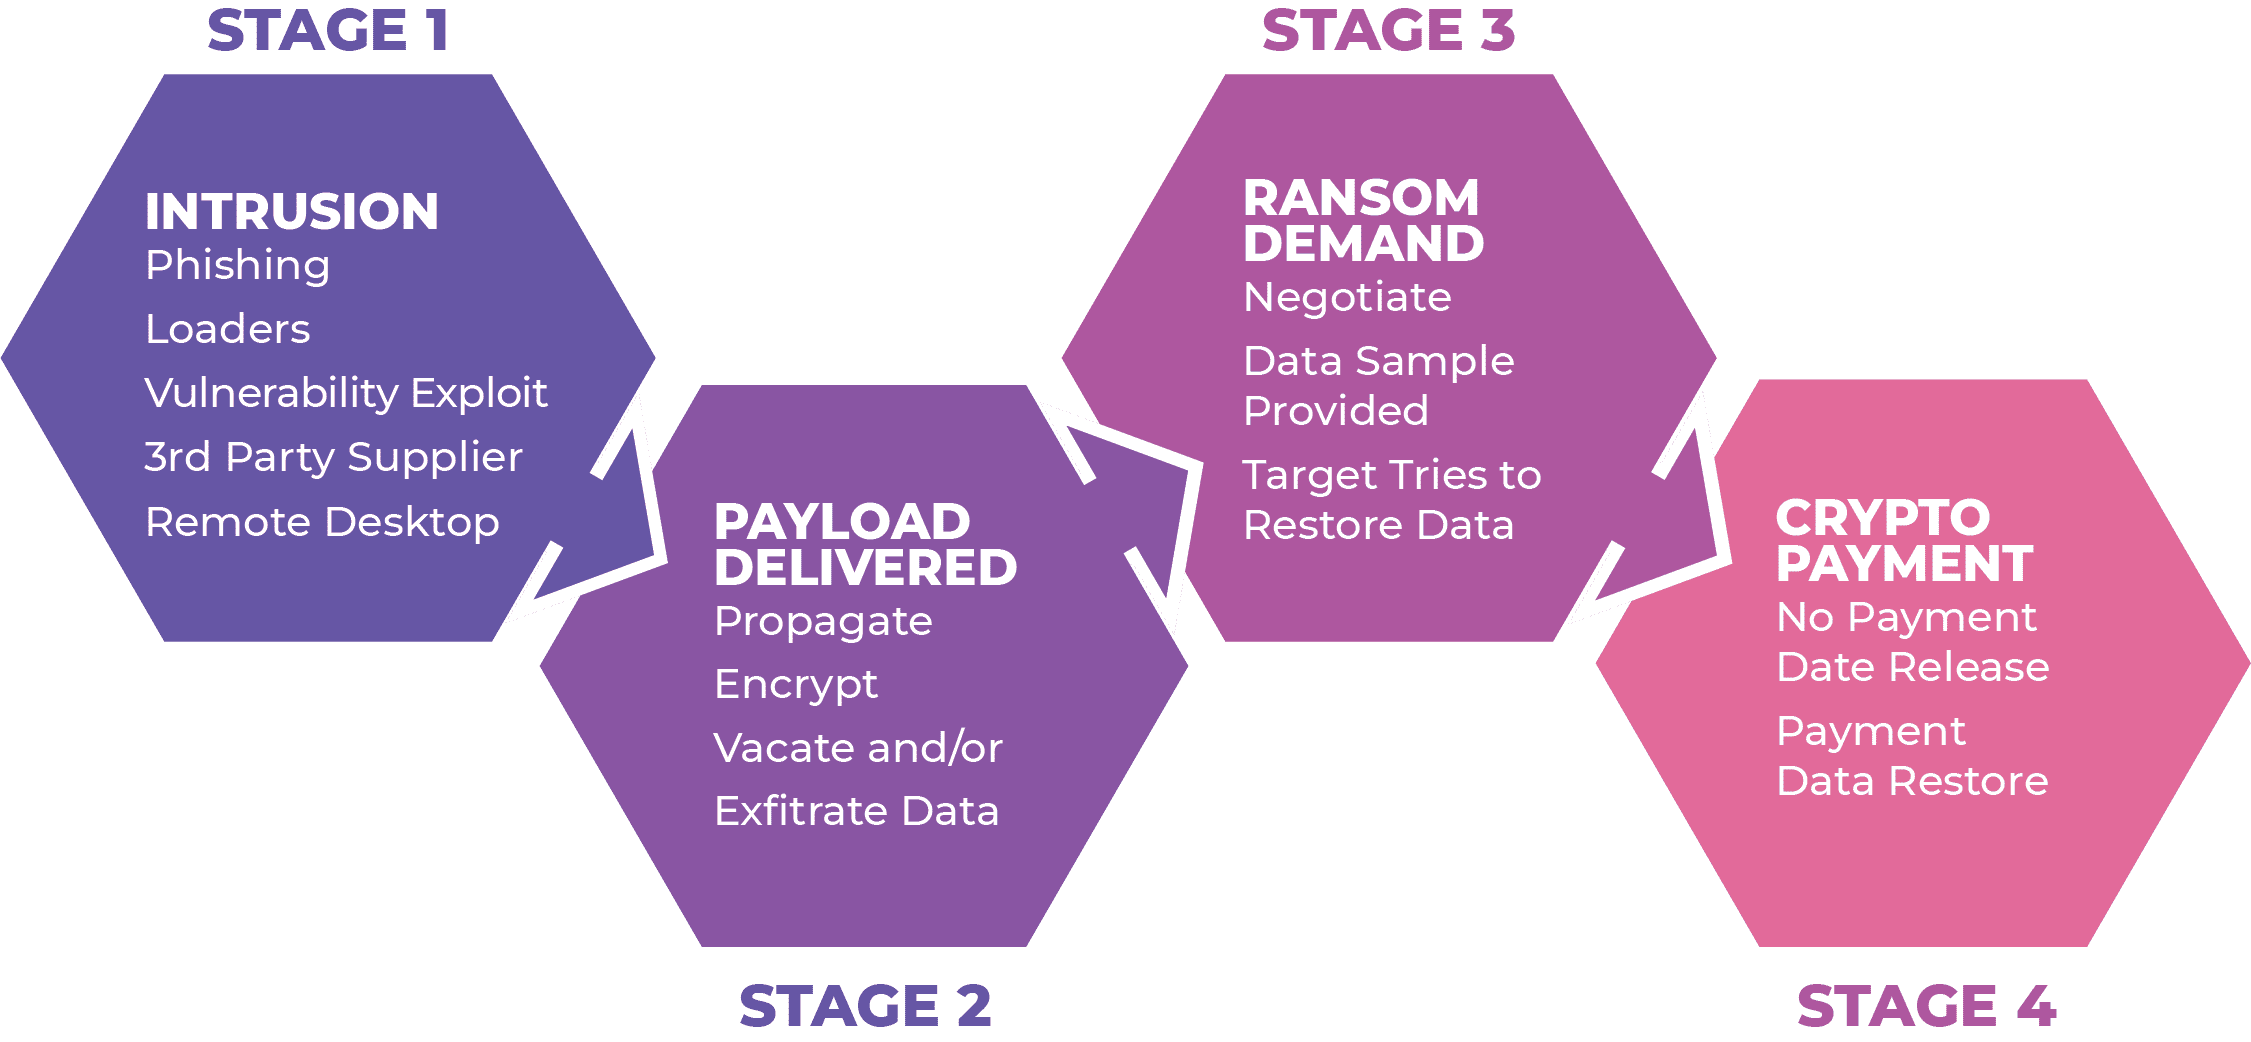 Ransomware Stages